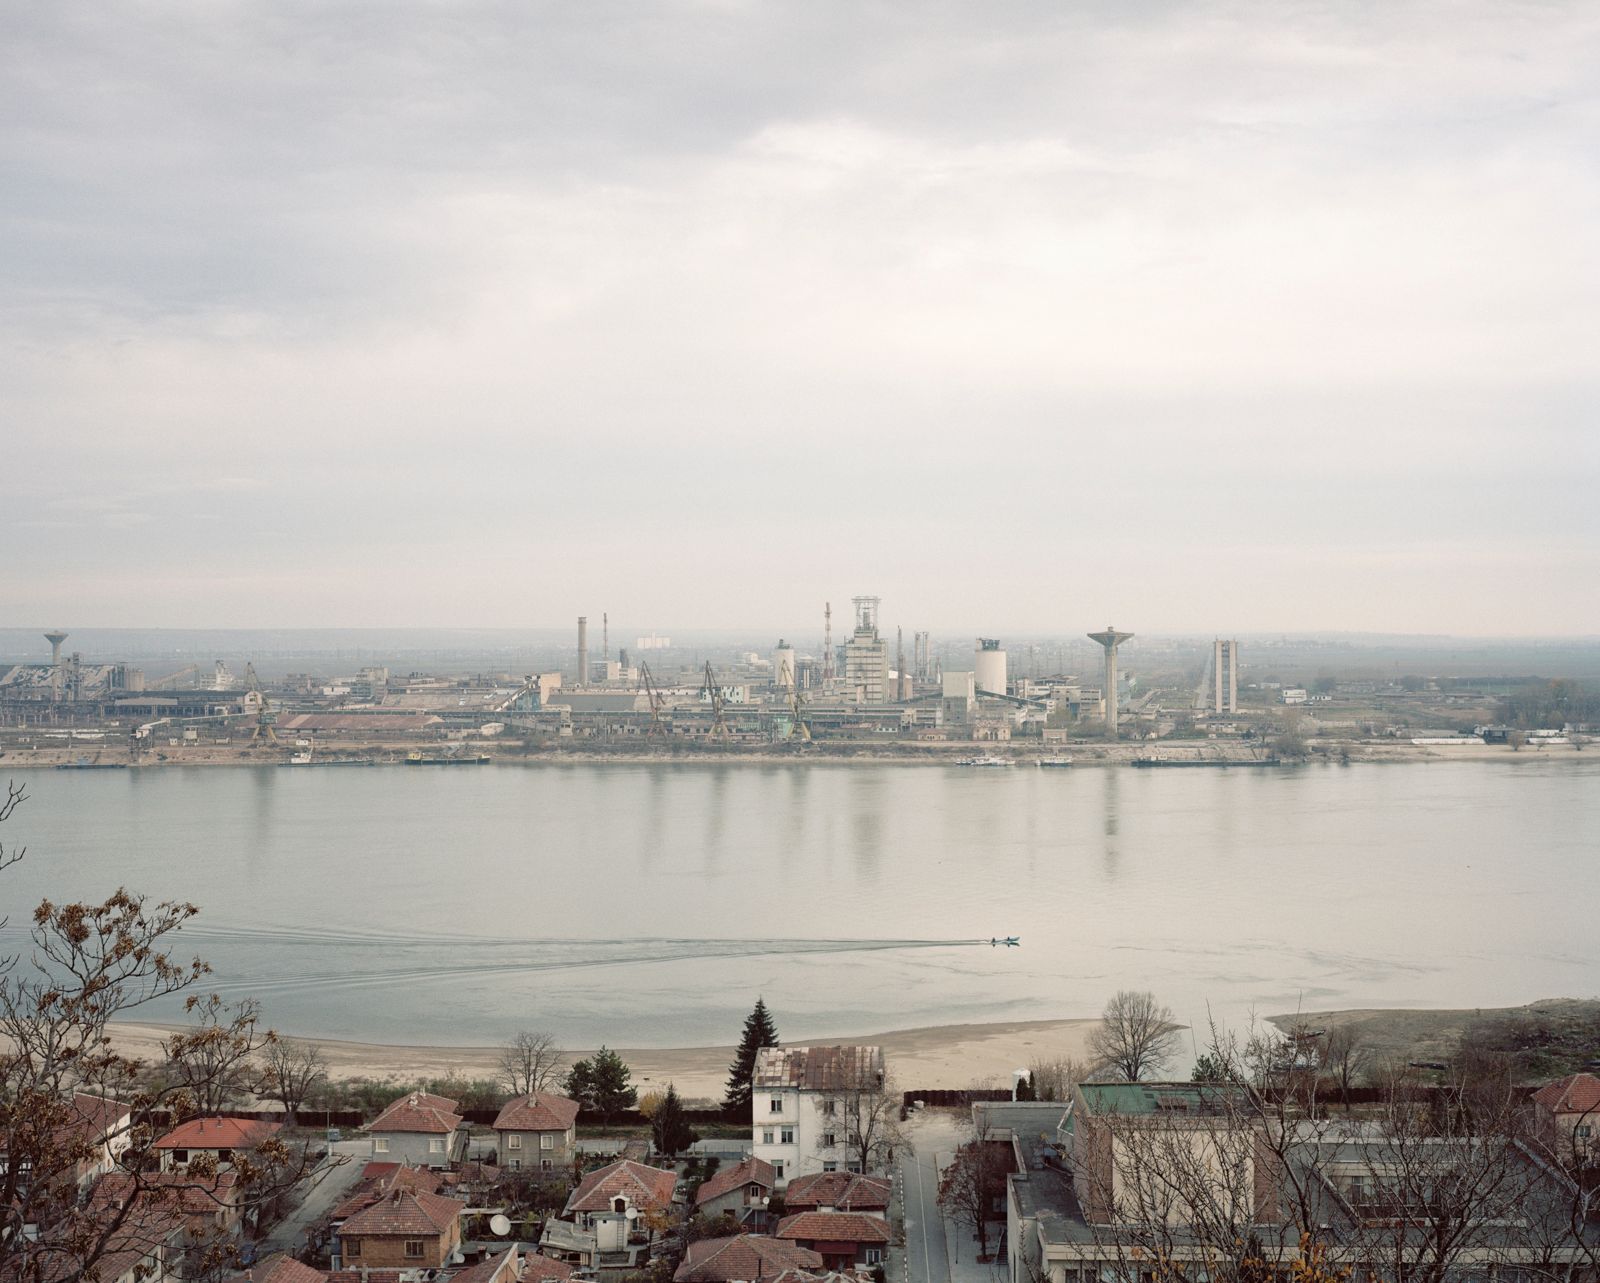 © Tommaso Rada - Image from the The Danube Isn't Blue photography project